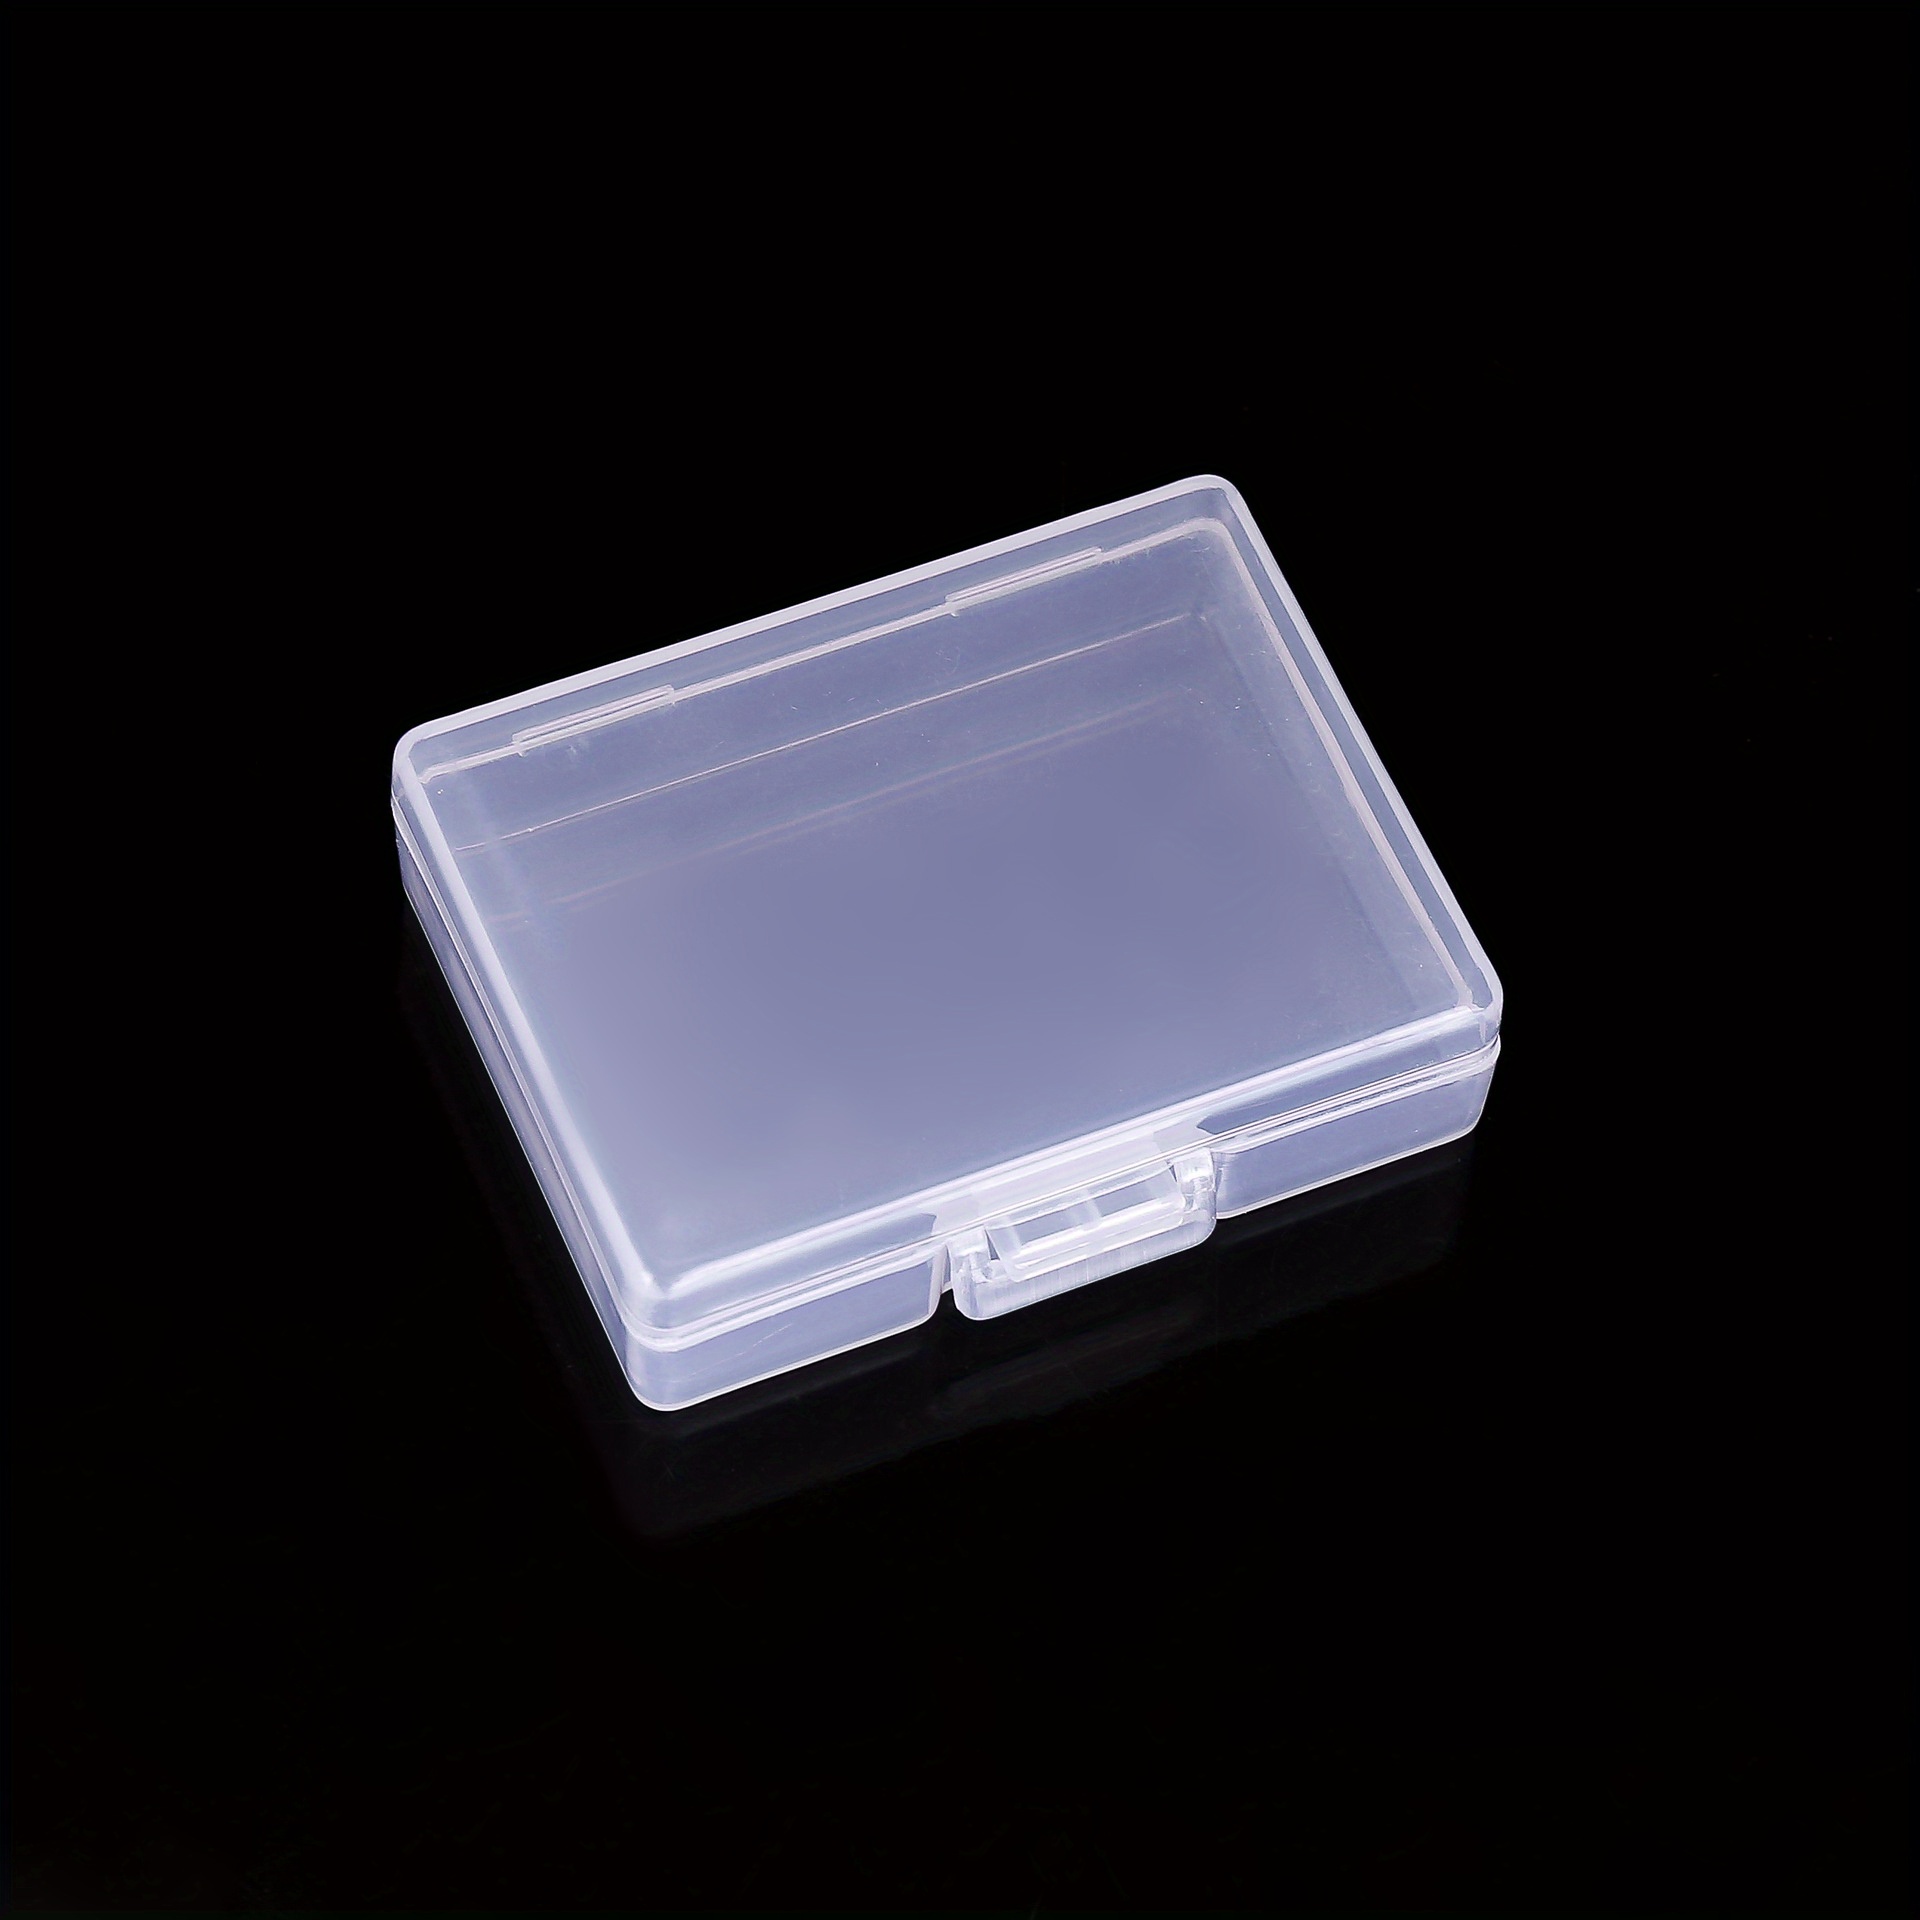 1pc Transparent Plastic Storage Box, Fishing Tackle Box, Medicine Box,  Jewelry Organizer, PP Storage Container For Small Parts, Diy Crafts